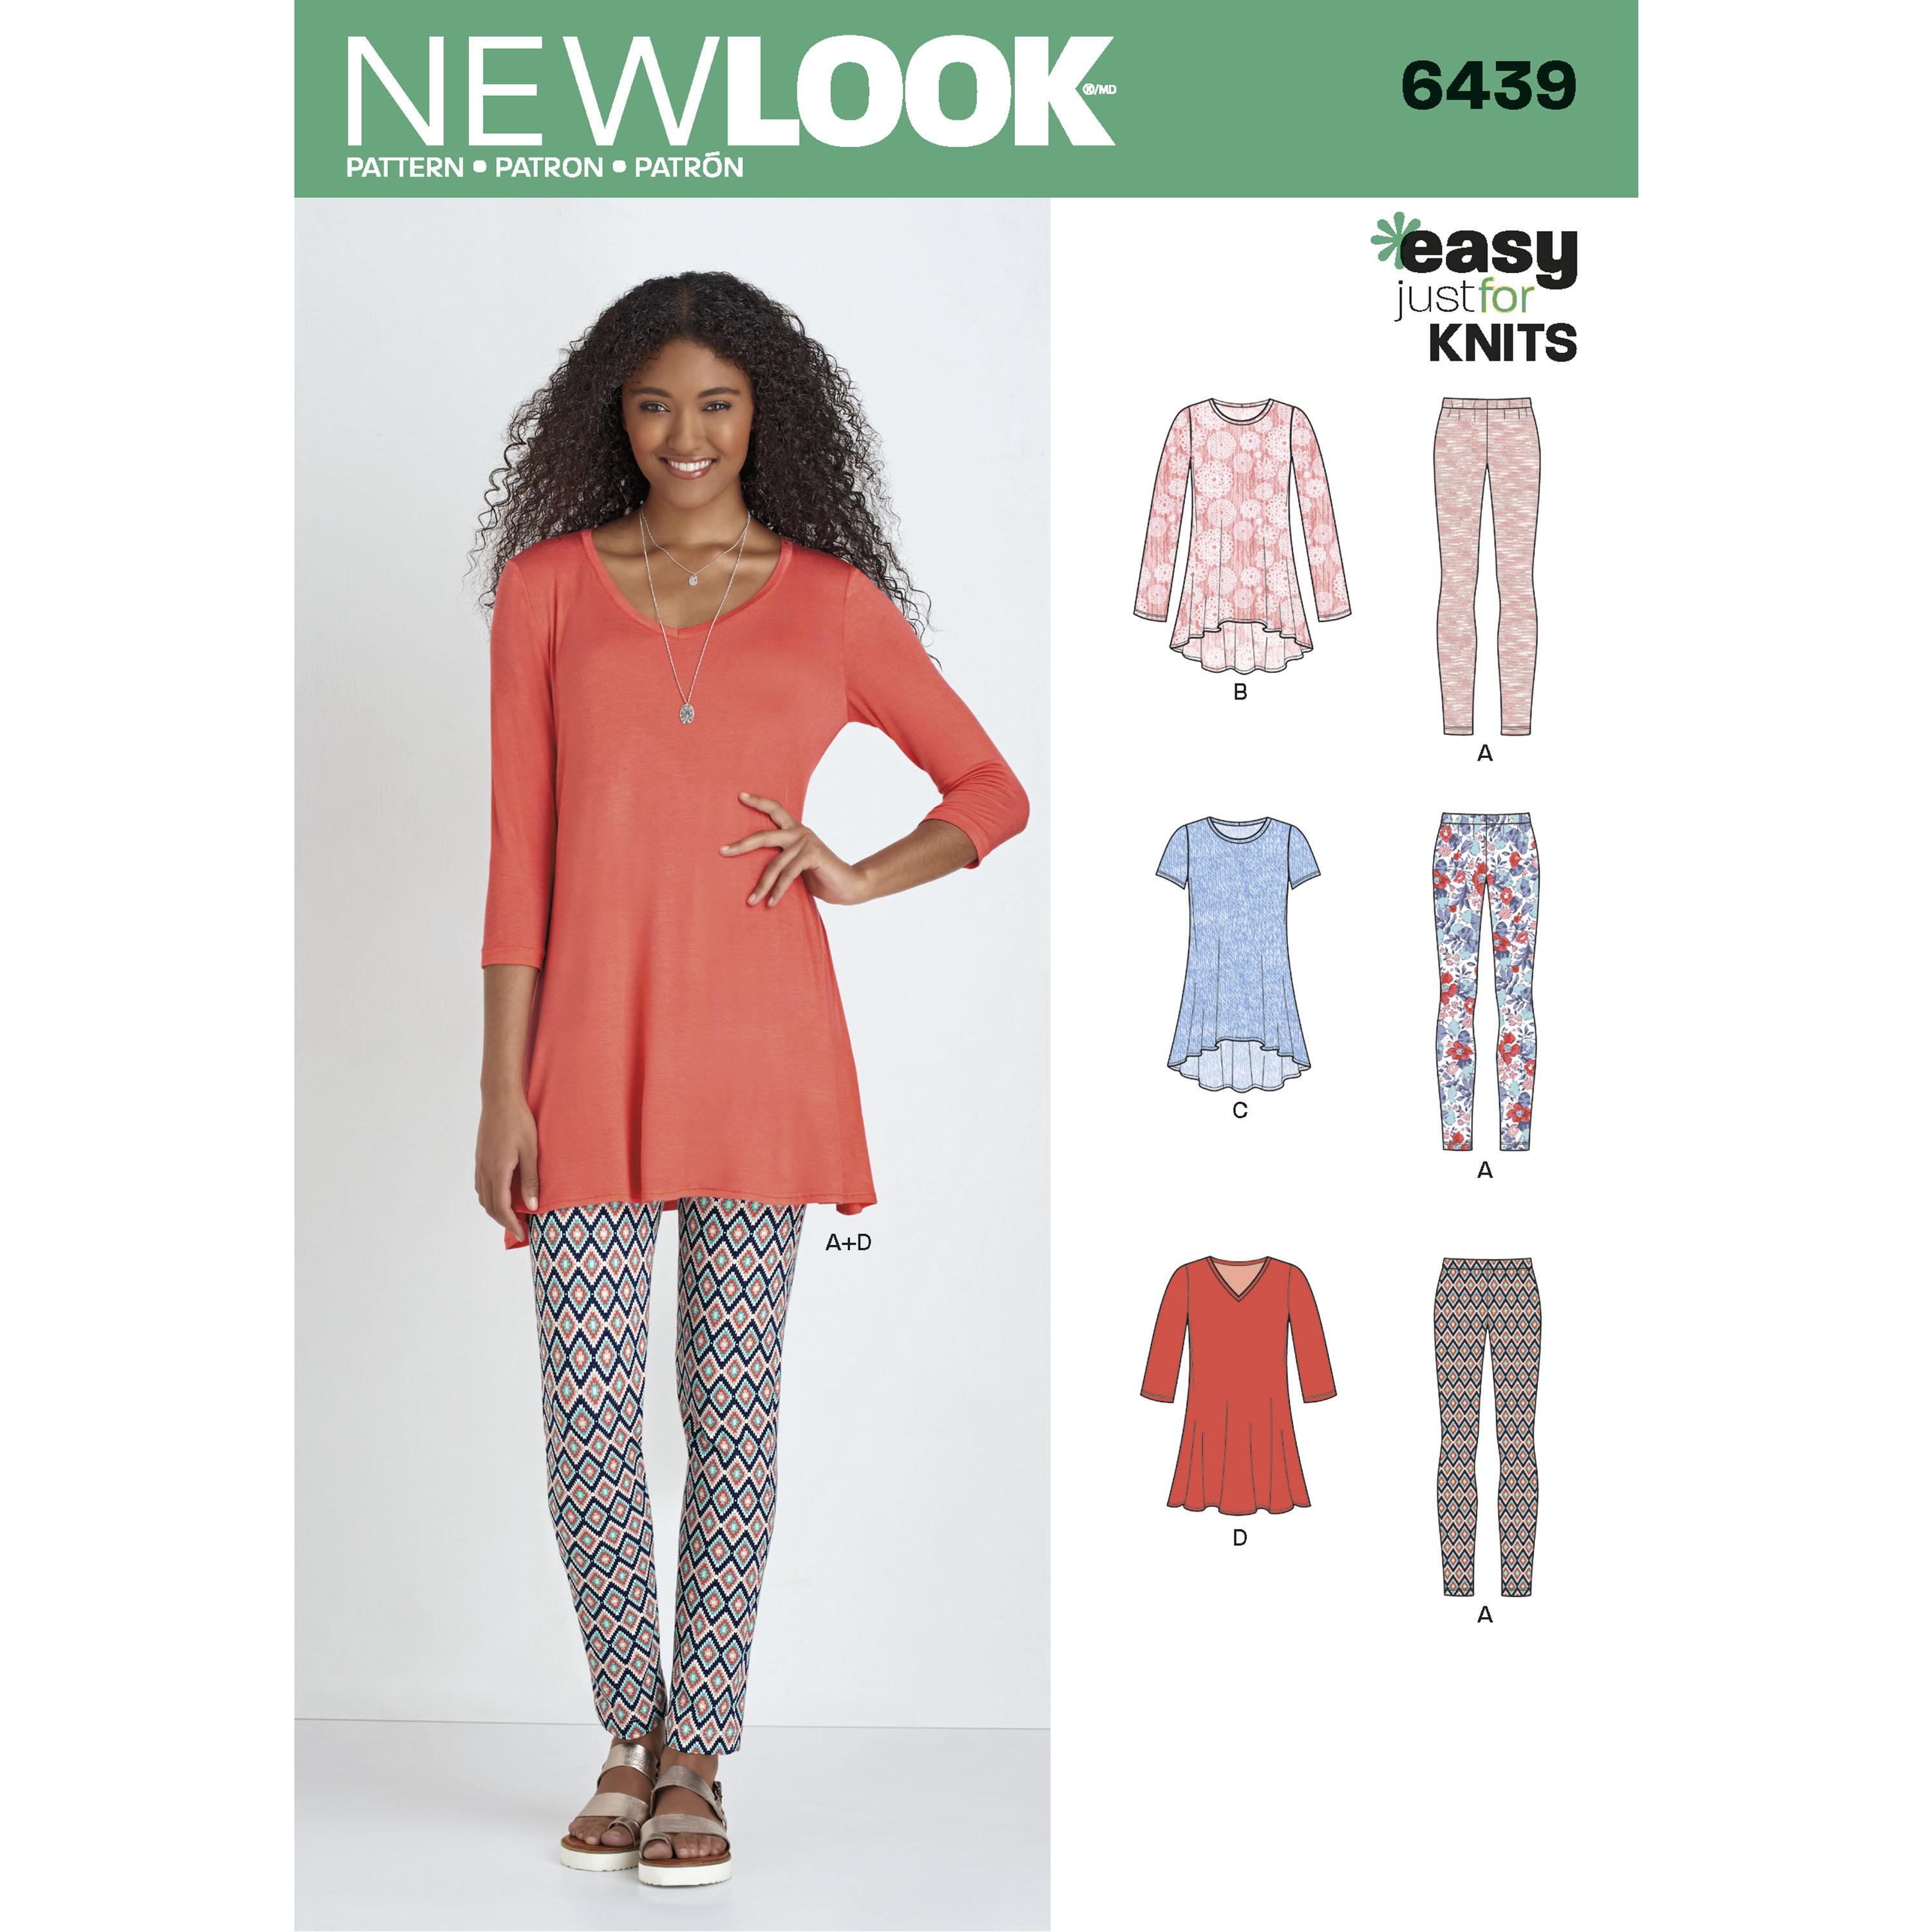 NewLook N6439 Misses' Knit Tunics with Leggings